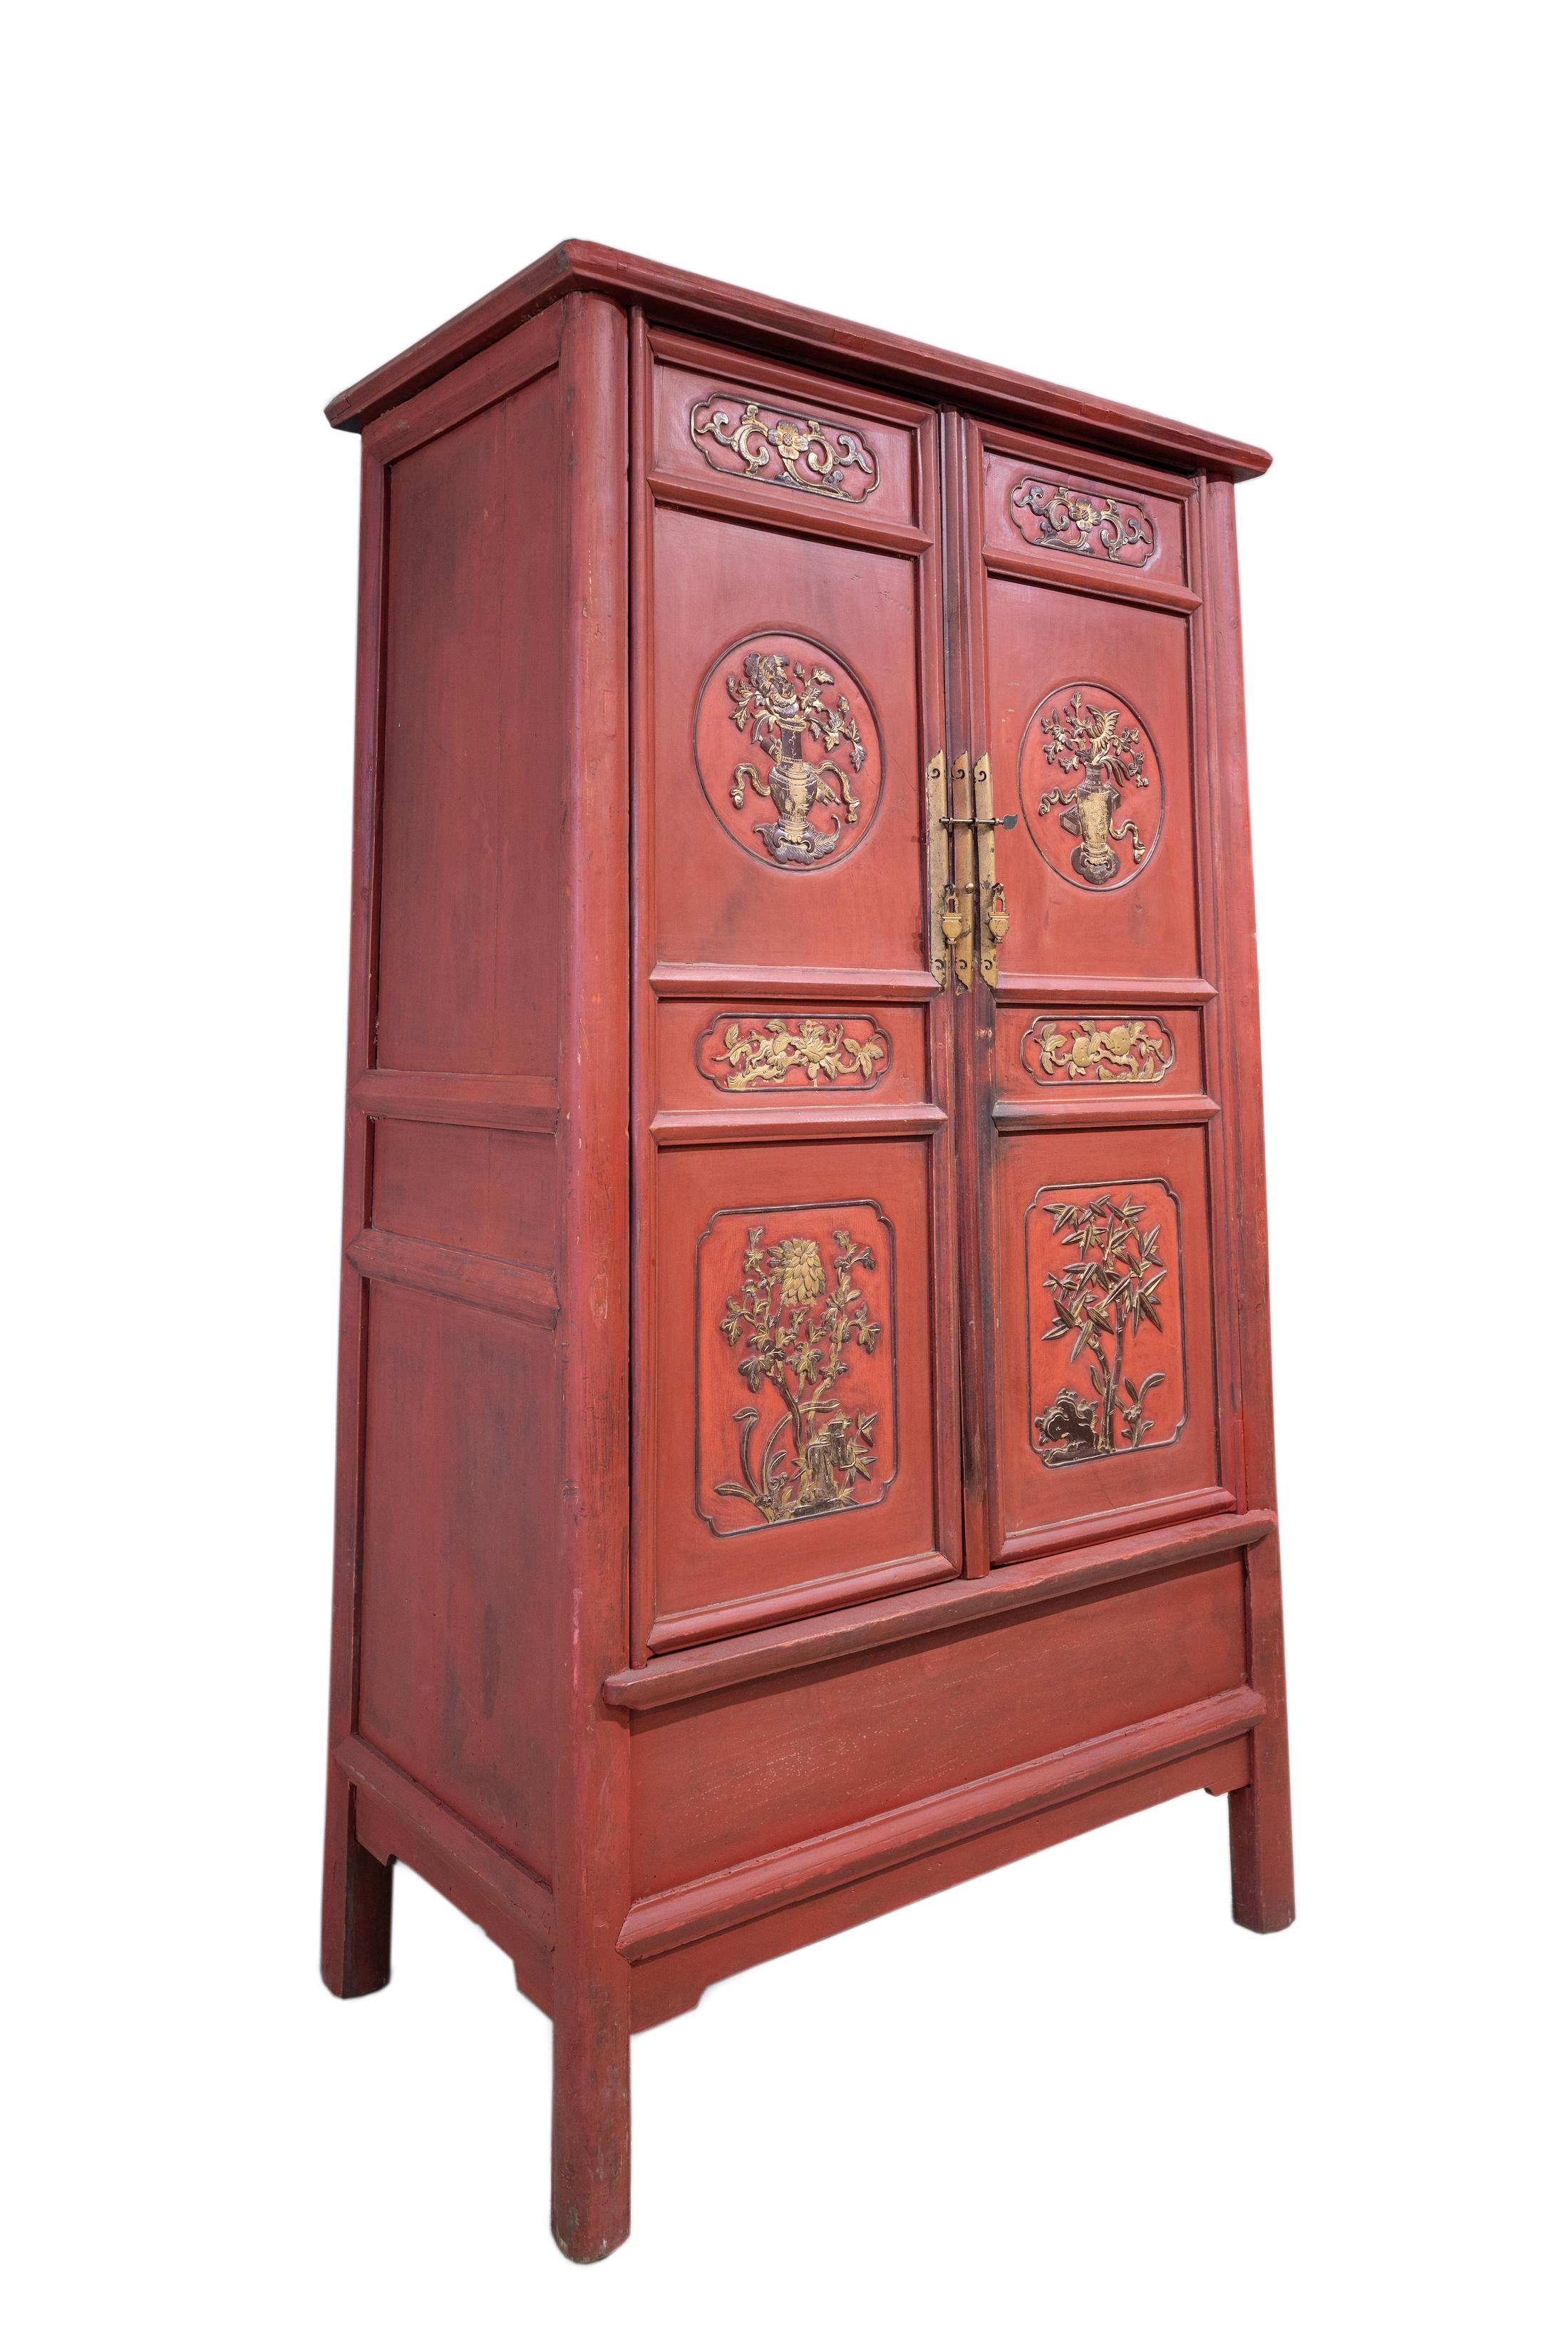 A tall round corner tapered cabinet with relief carvings from the Northern Jiangsu region, commonly known as Subei region, China. The panels are carved with roundels of flowers from the four seasons.
The flowers in the top panels are peony and water